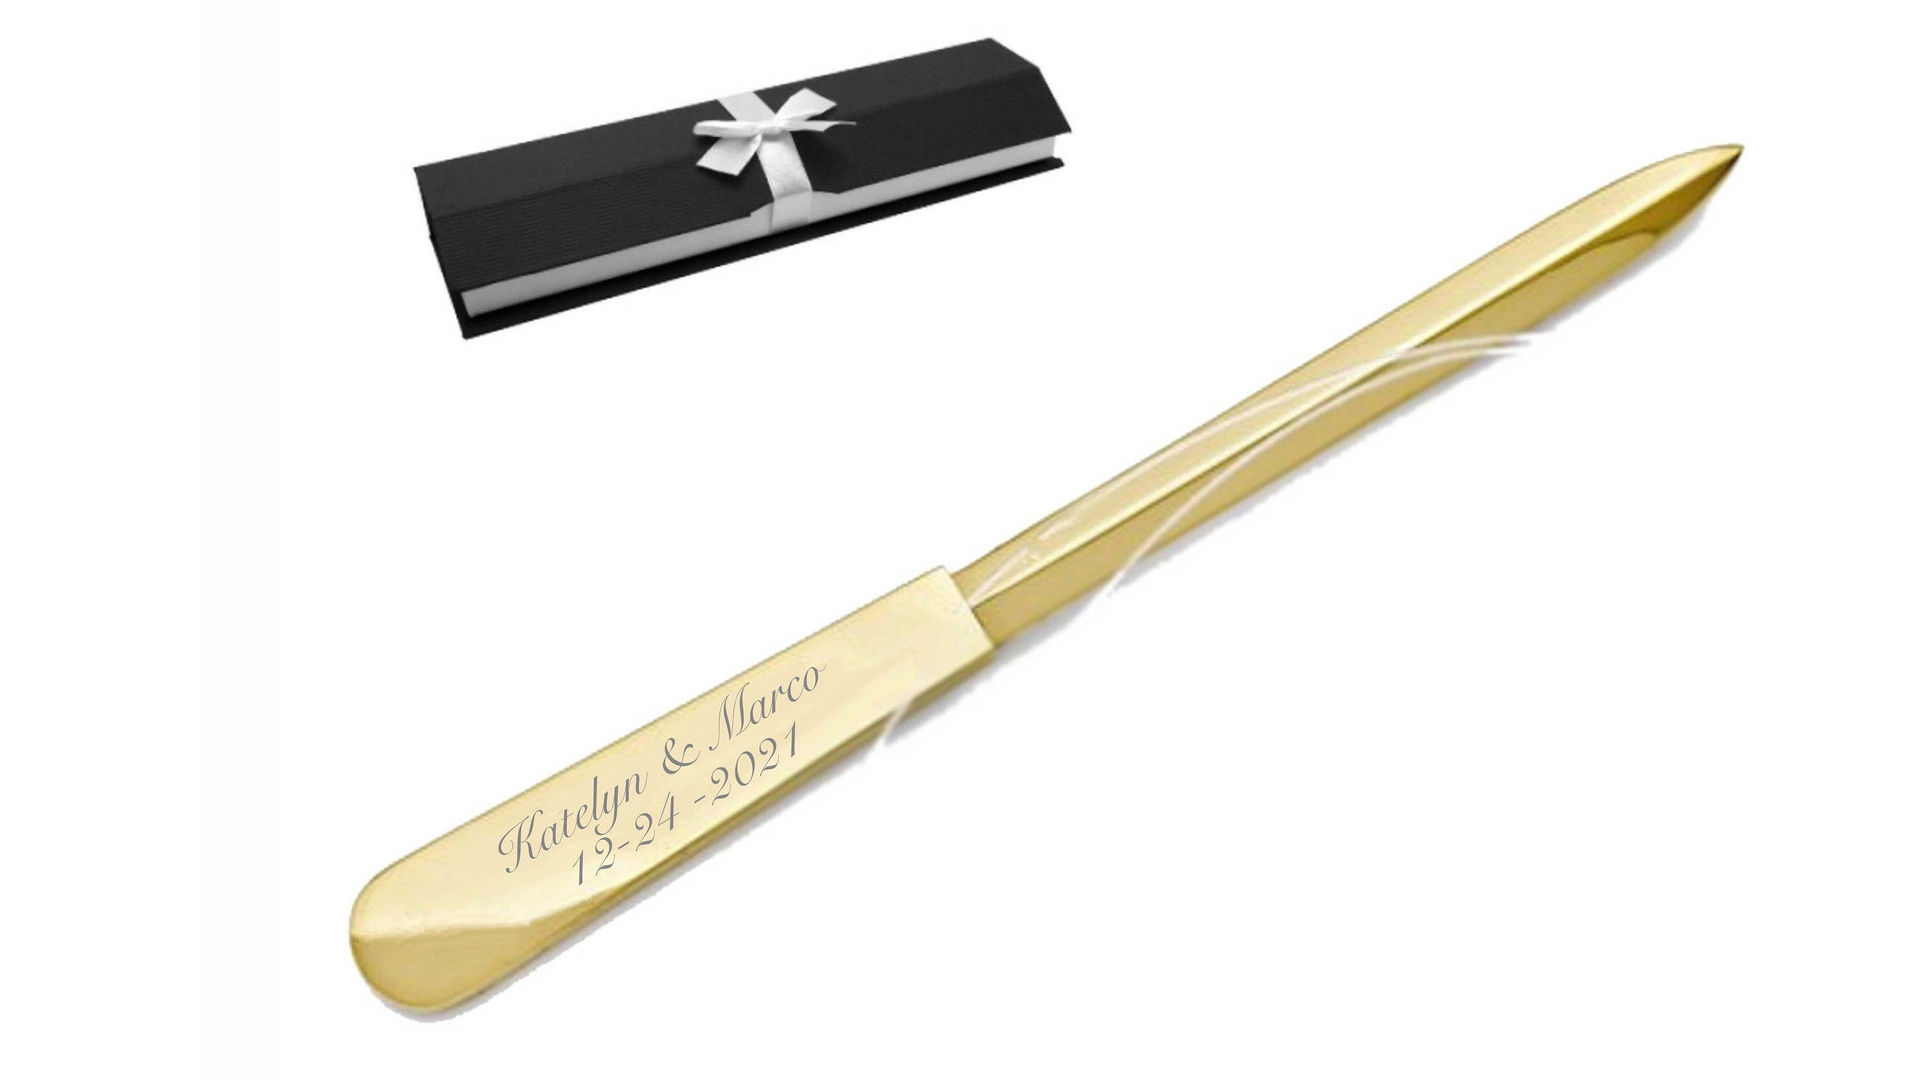 A personalized letter opener